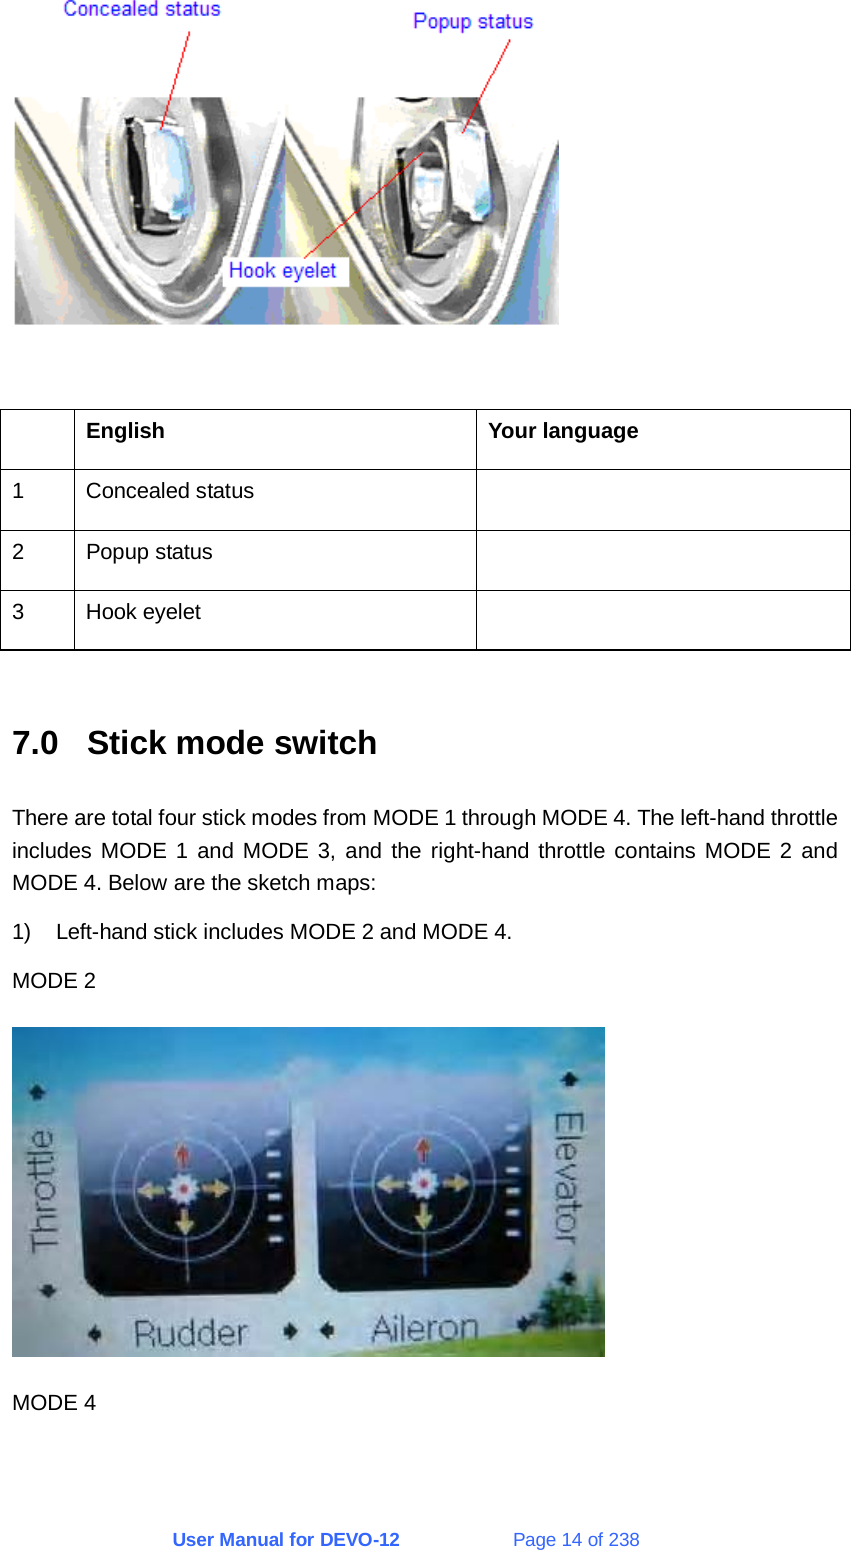 User Manual for DEVO-12             Page 14 of 238    English  Your language 1 Concealed status   2 Popup status   3 Hook eyelet    7.0 Stick mode switch There are total four stick modes from MODE 1 through MODE 4. The left-hand throttle includes MODE 1 and MODE 3, and the right-hand throttle contains MODE 2 and MODE 4. Below are the sketch maps: 1)  Left-hand stick includes MODE 2 and MODE 4. MODE 2  MODE 4 